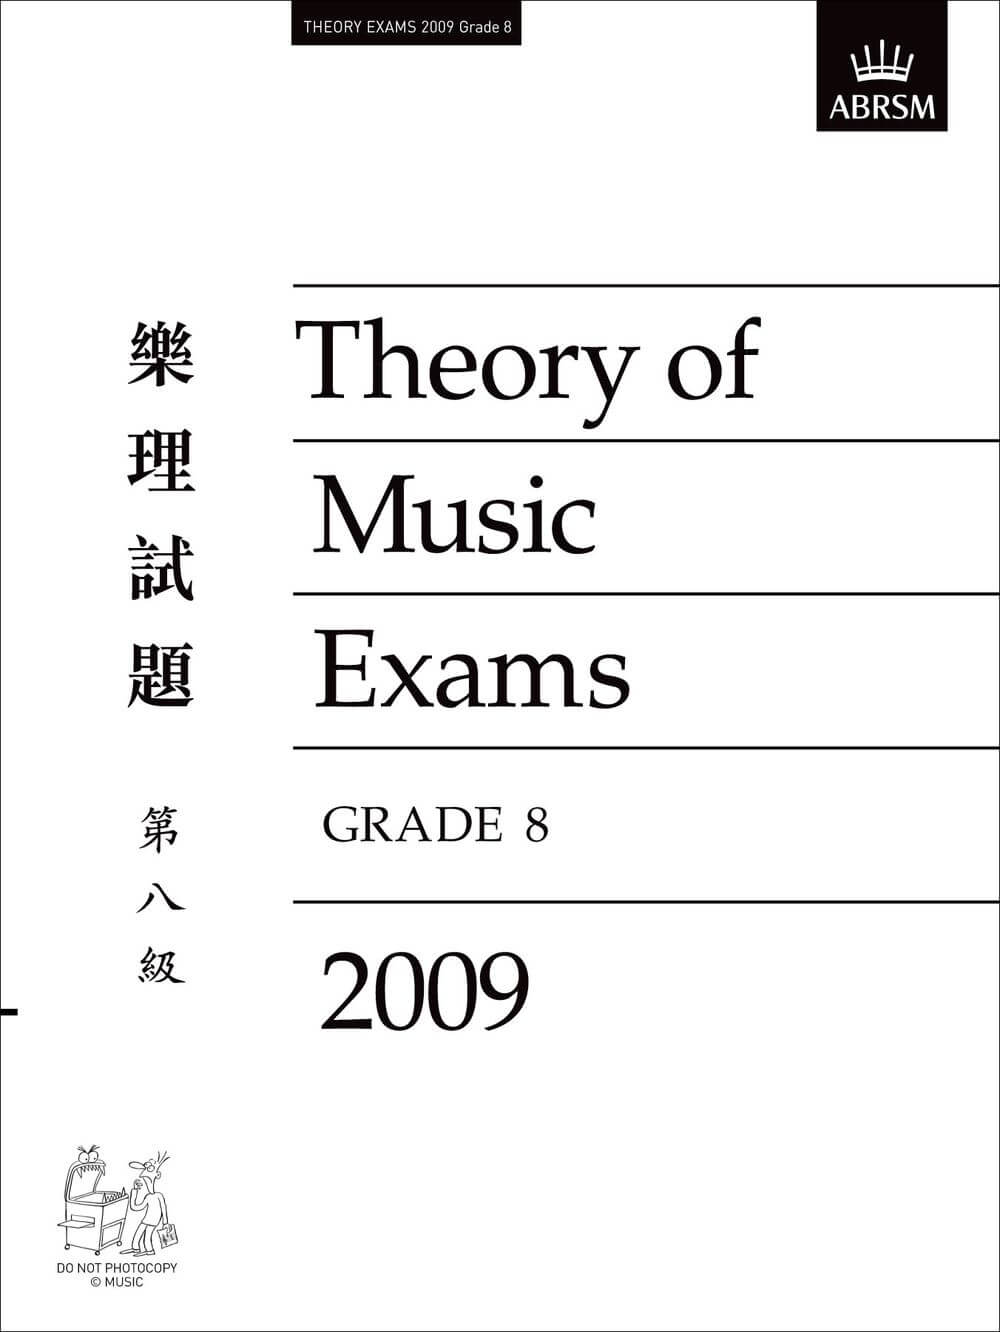 Theory of Music Exams, Grade 8, 2009 CLE